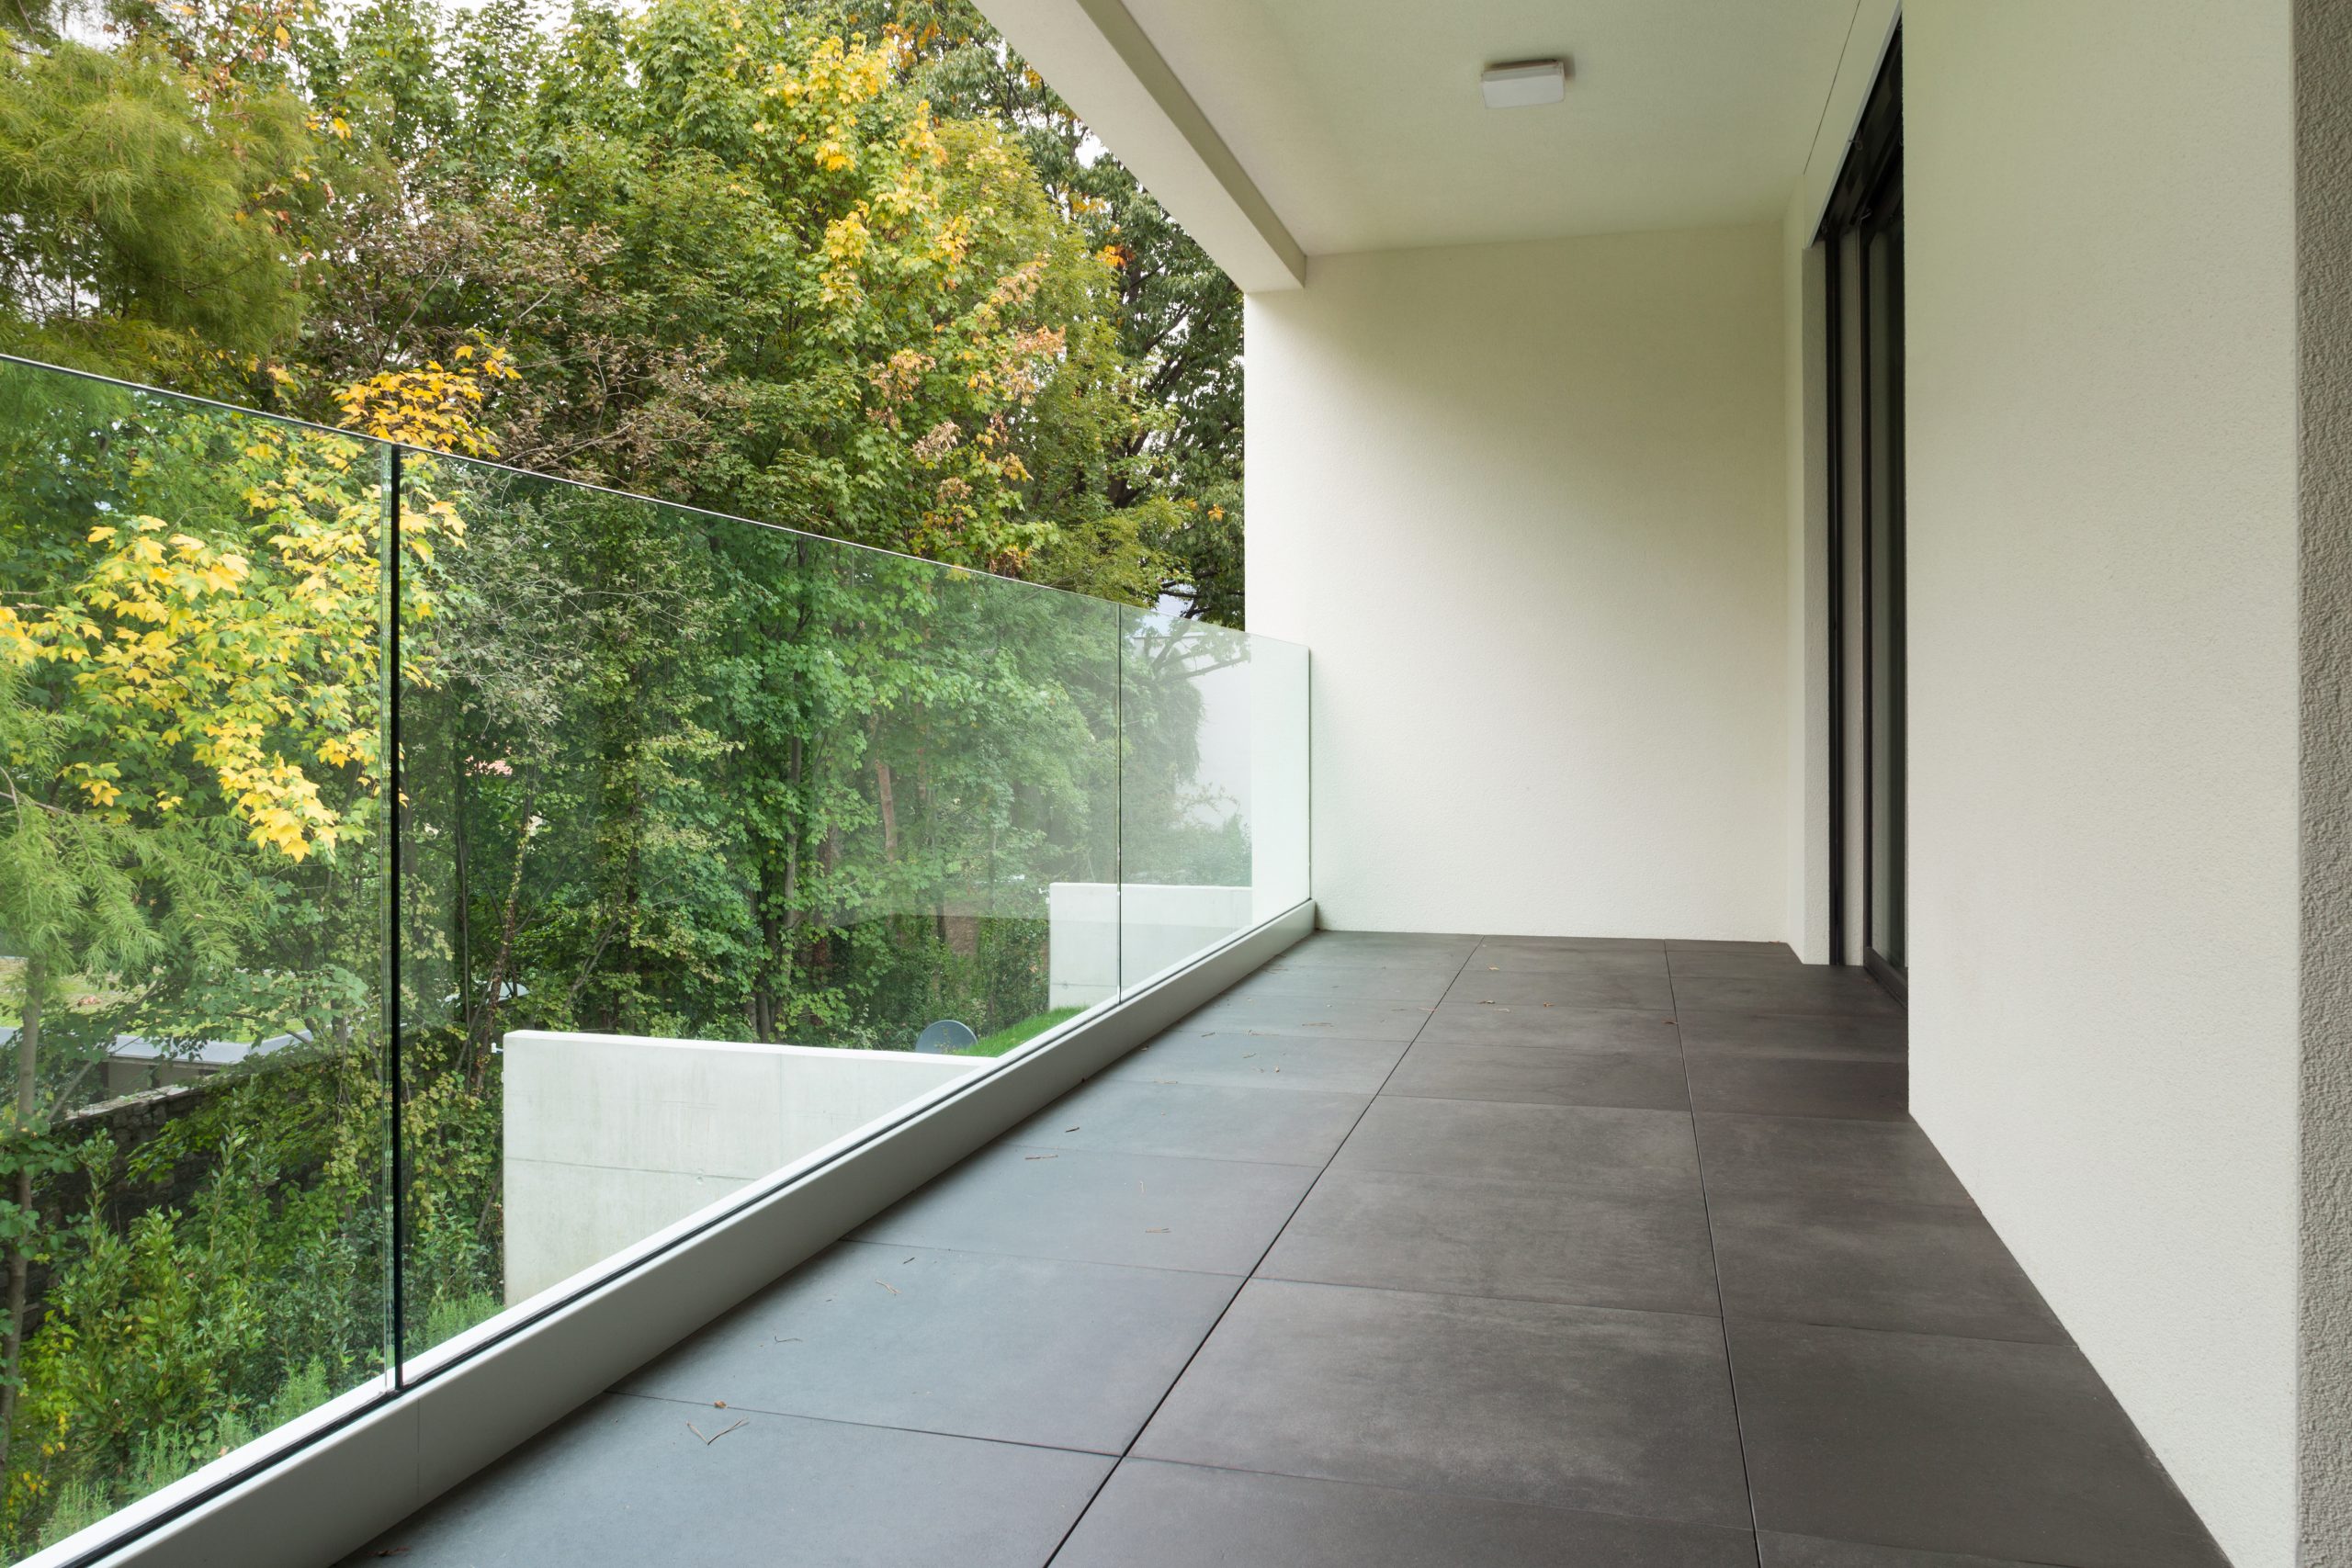 Glass Balustrates and Railings